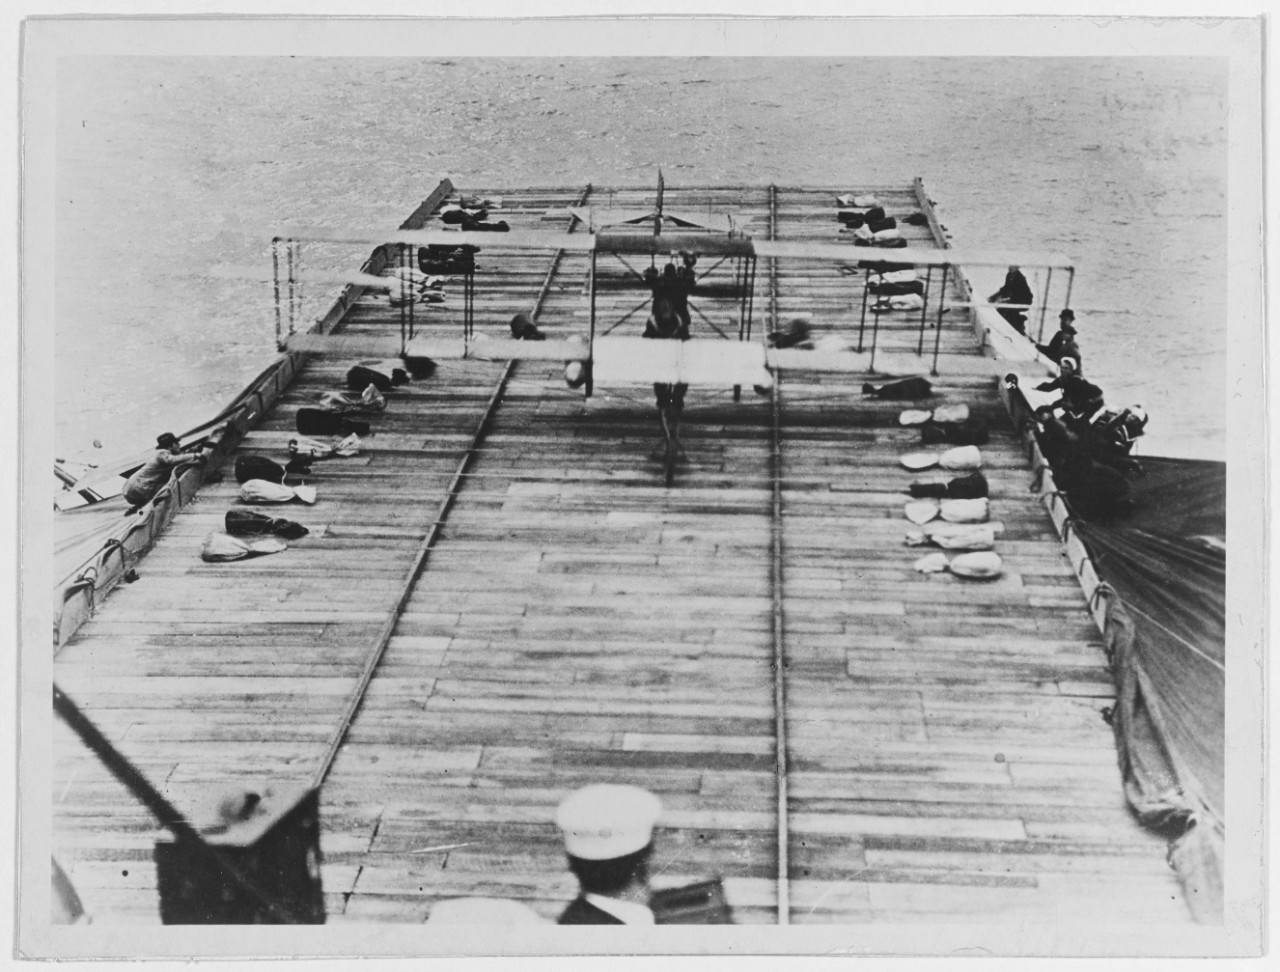 Photo #: NH 77608  First airplane landing on a warship, 18 January 1911